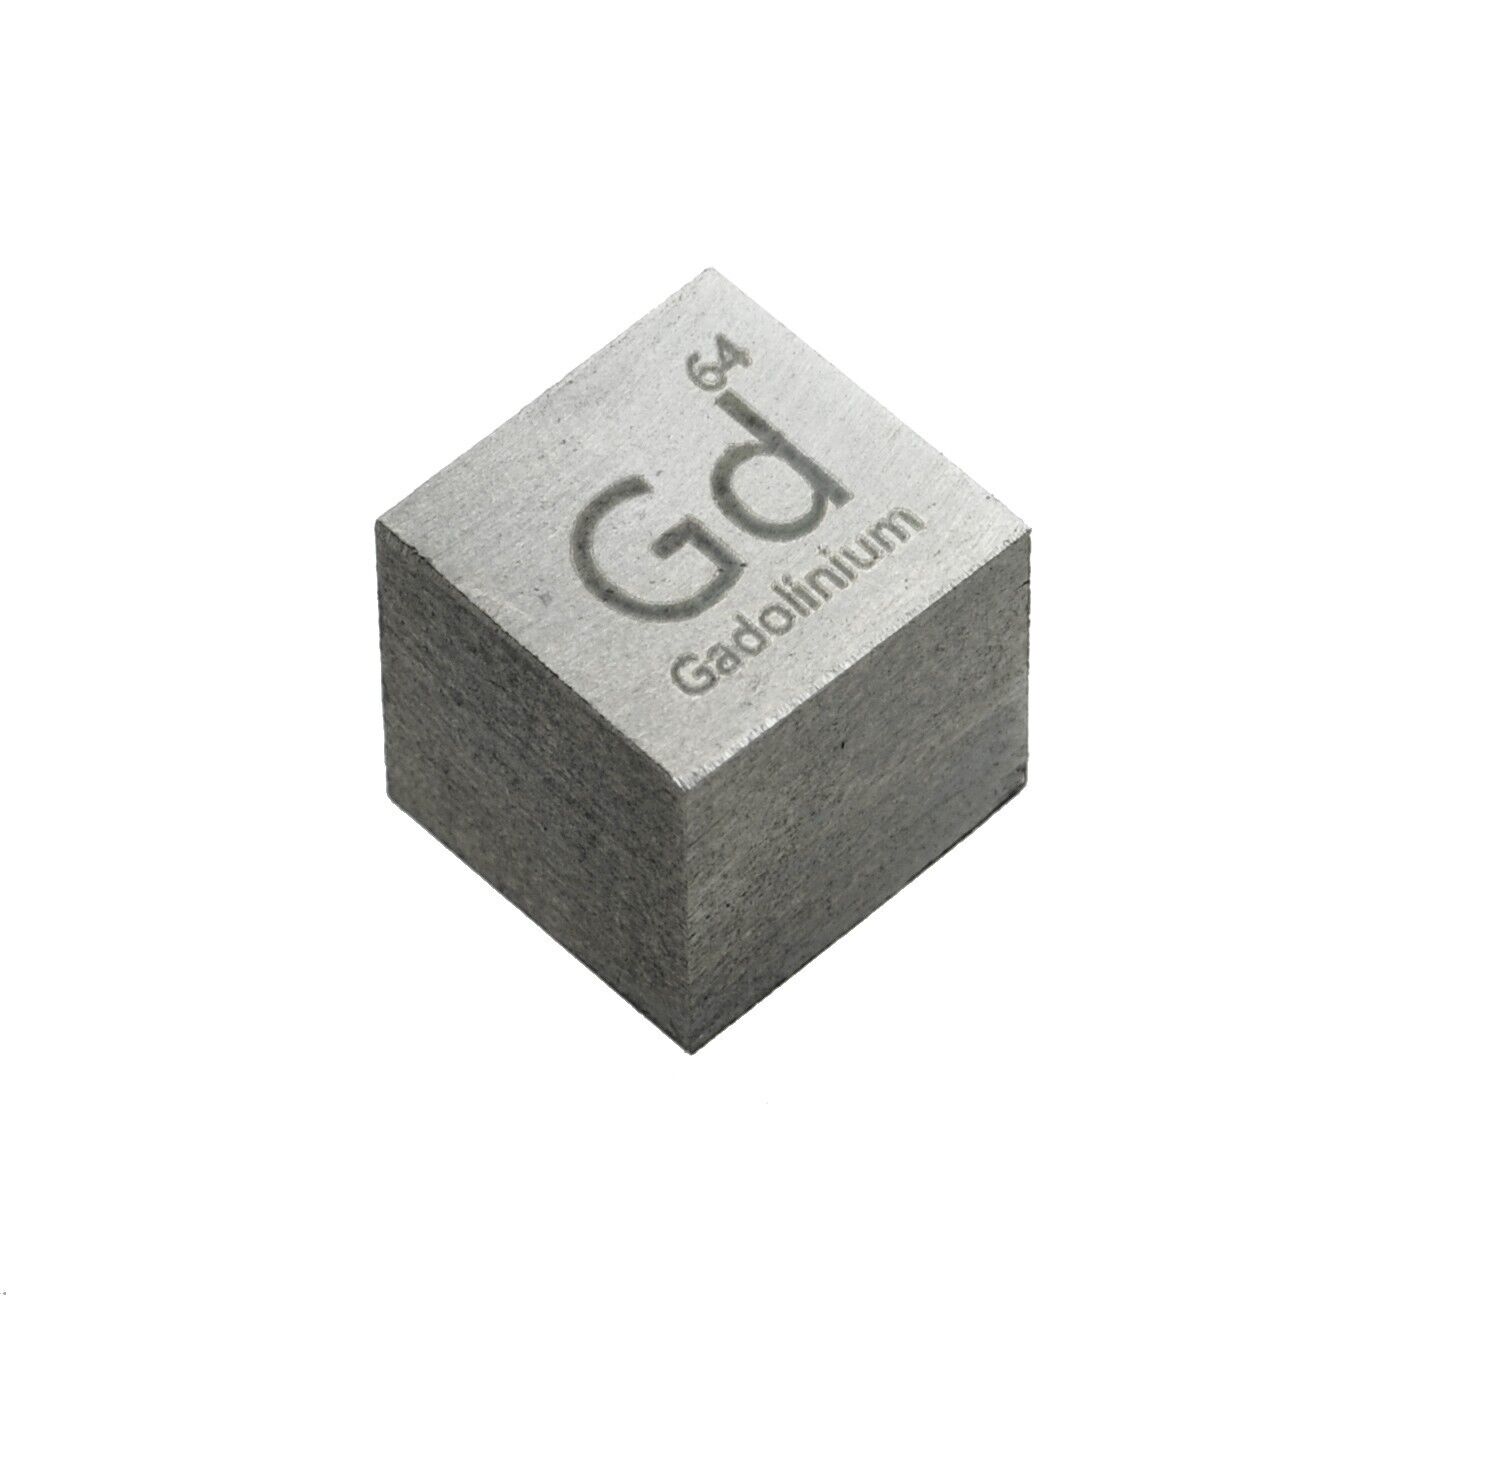 Gadolinium Metal 10mm Density Cube 99.9% for Element Collection USA SHIPPING